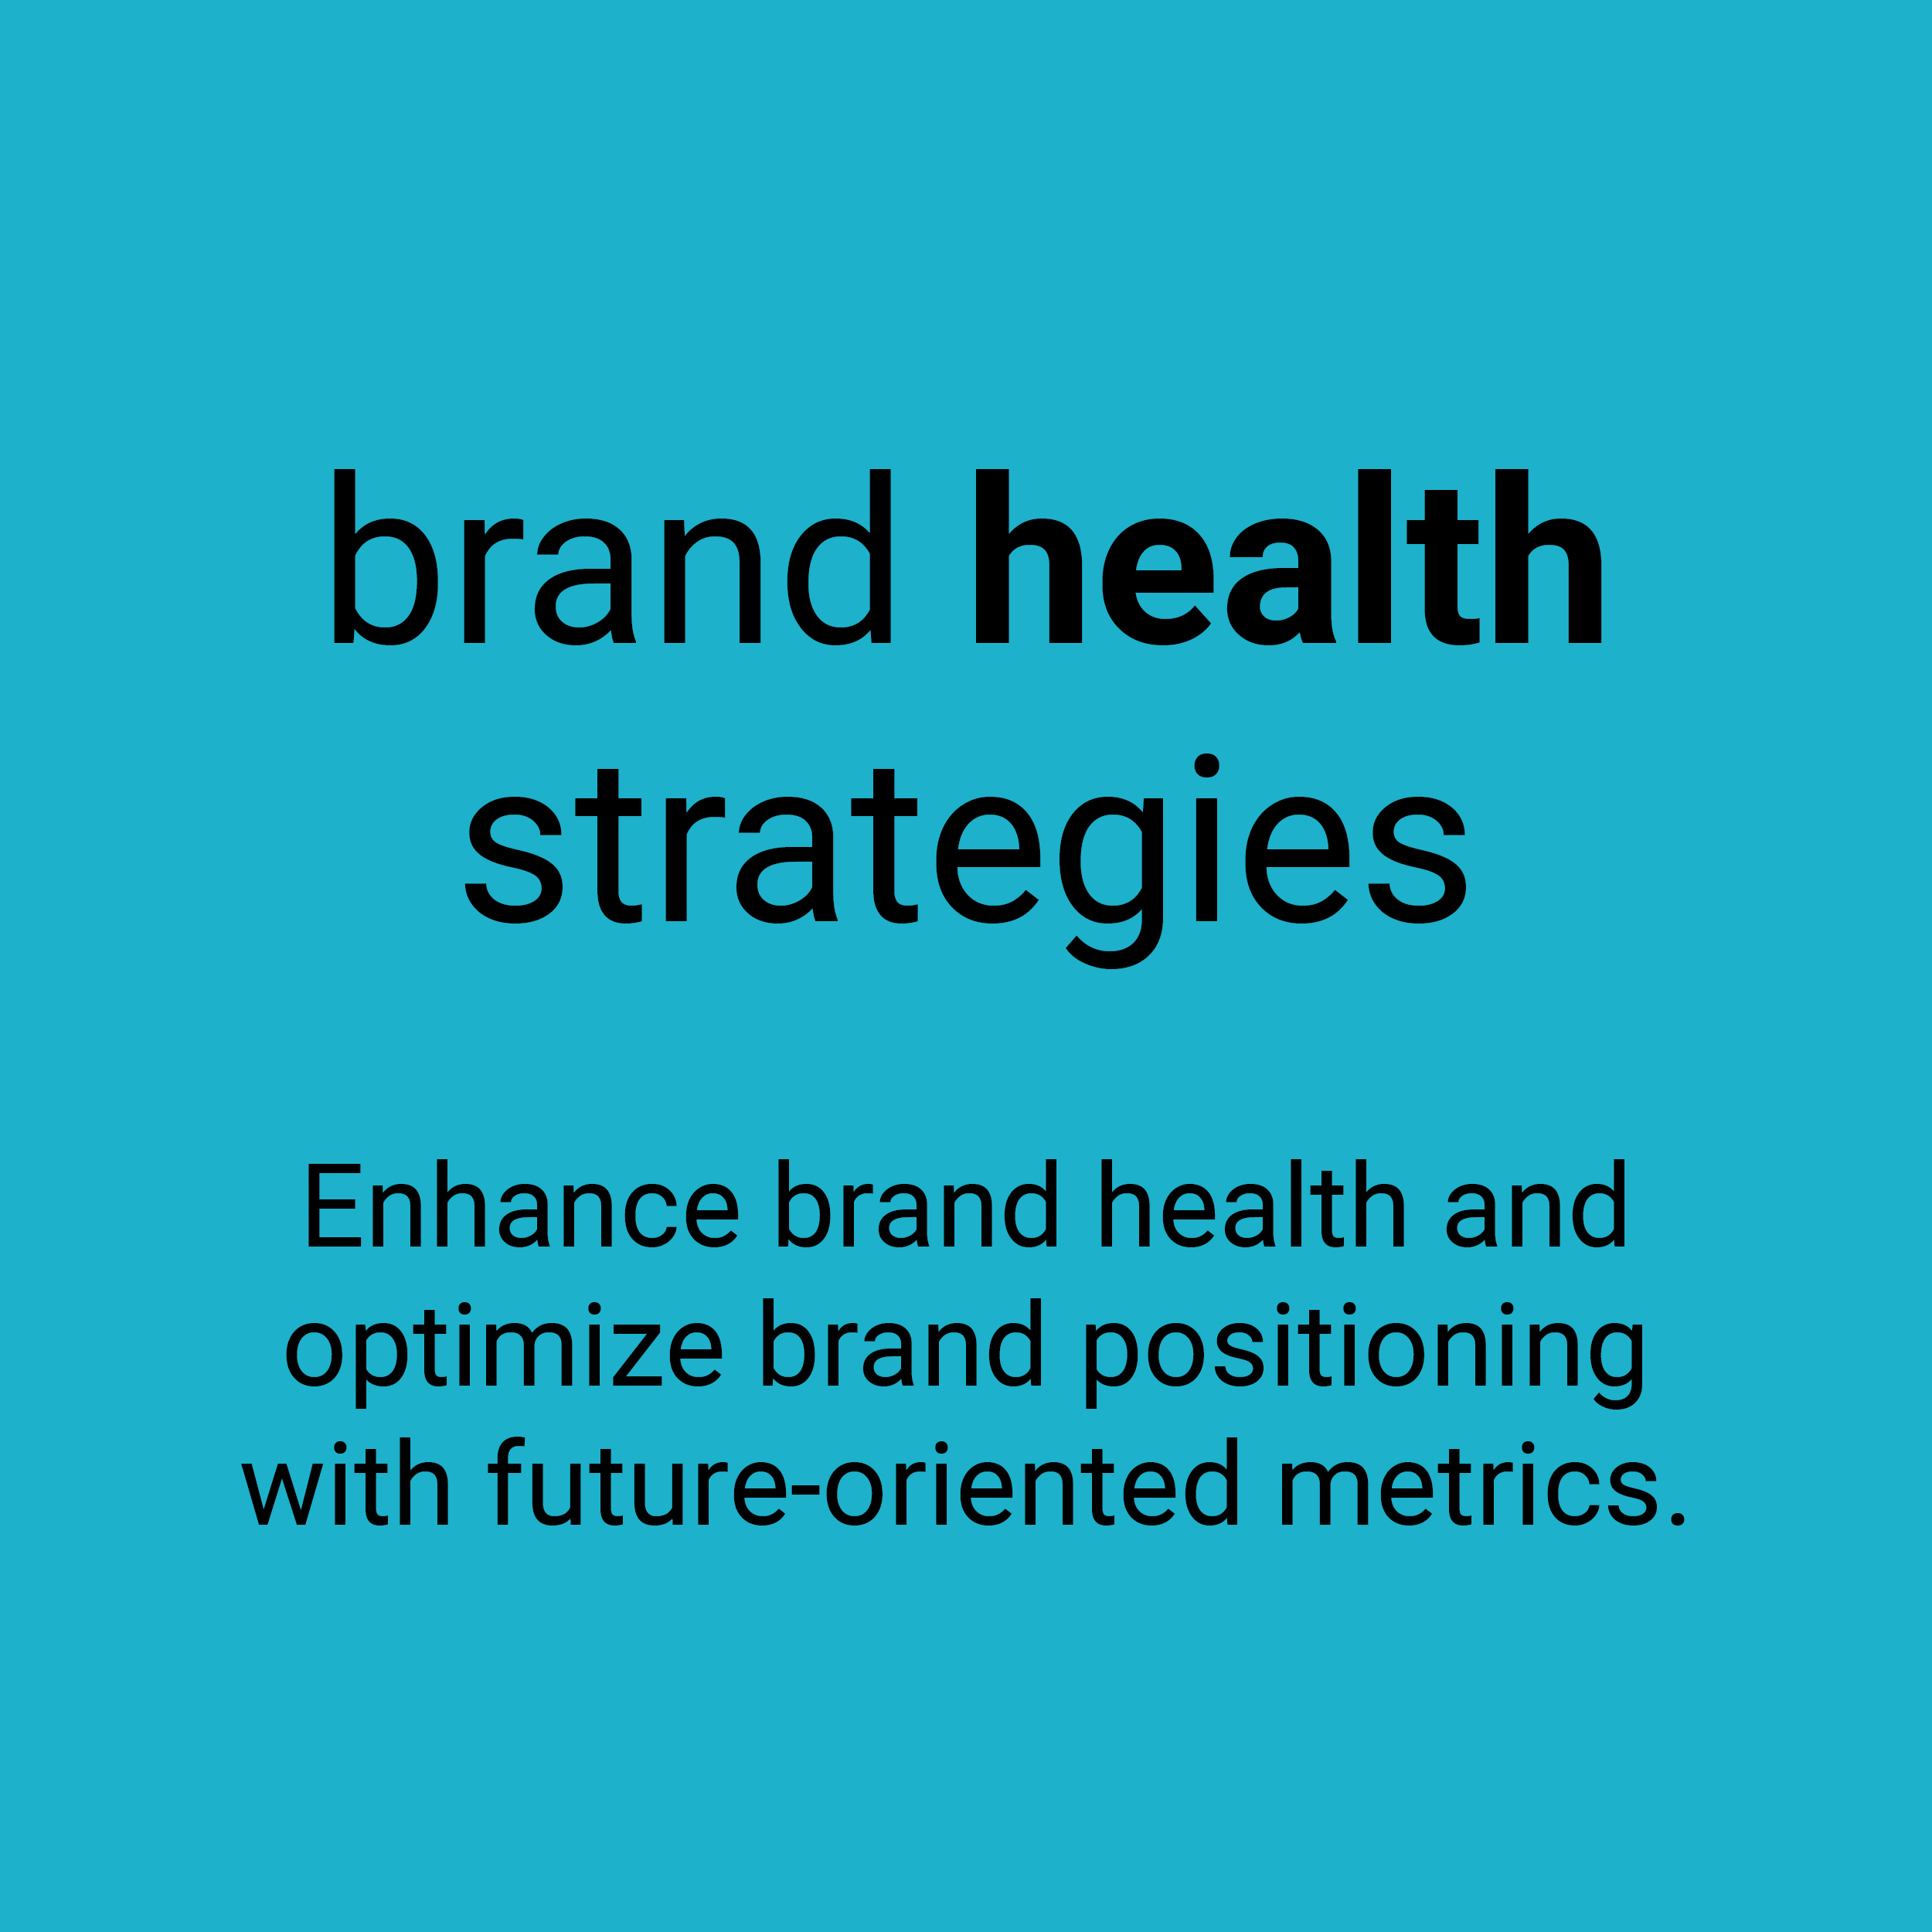 Brand Health strategies. Enhance brand health and optimize brand positioning with future-oriented metrics.